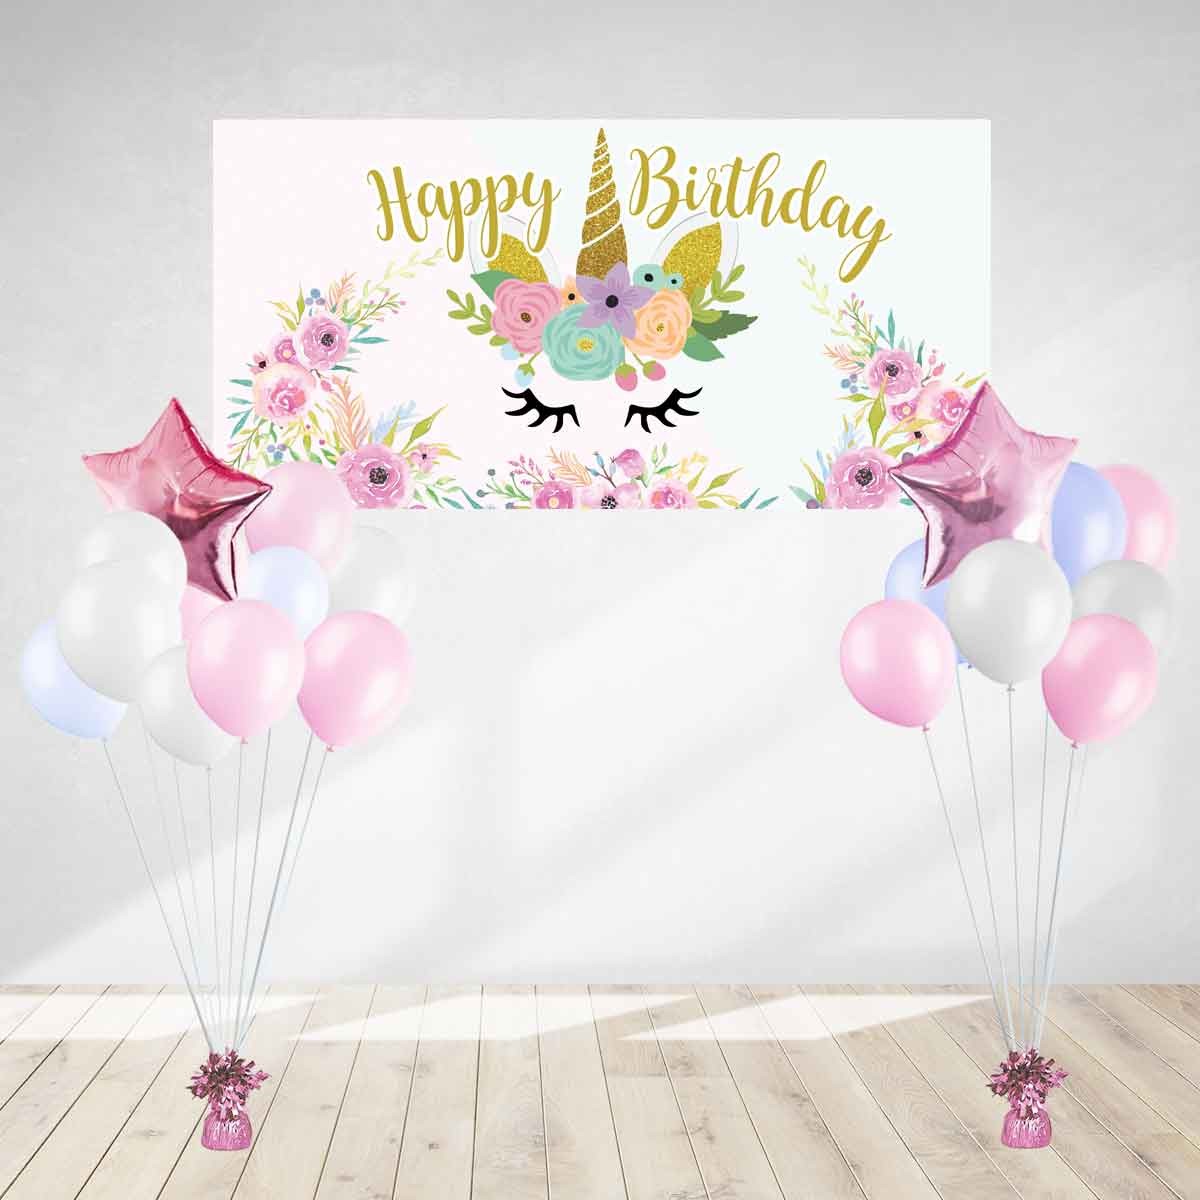 Magical Unicorn Birthday Banner with Lovely matching helium balloons.